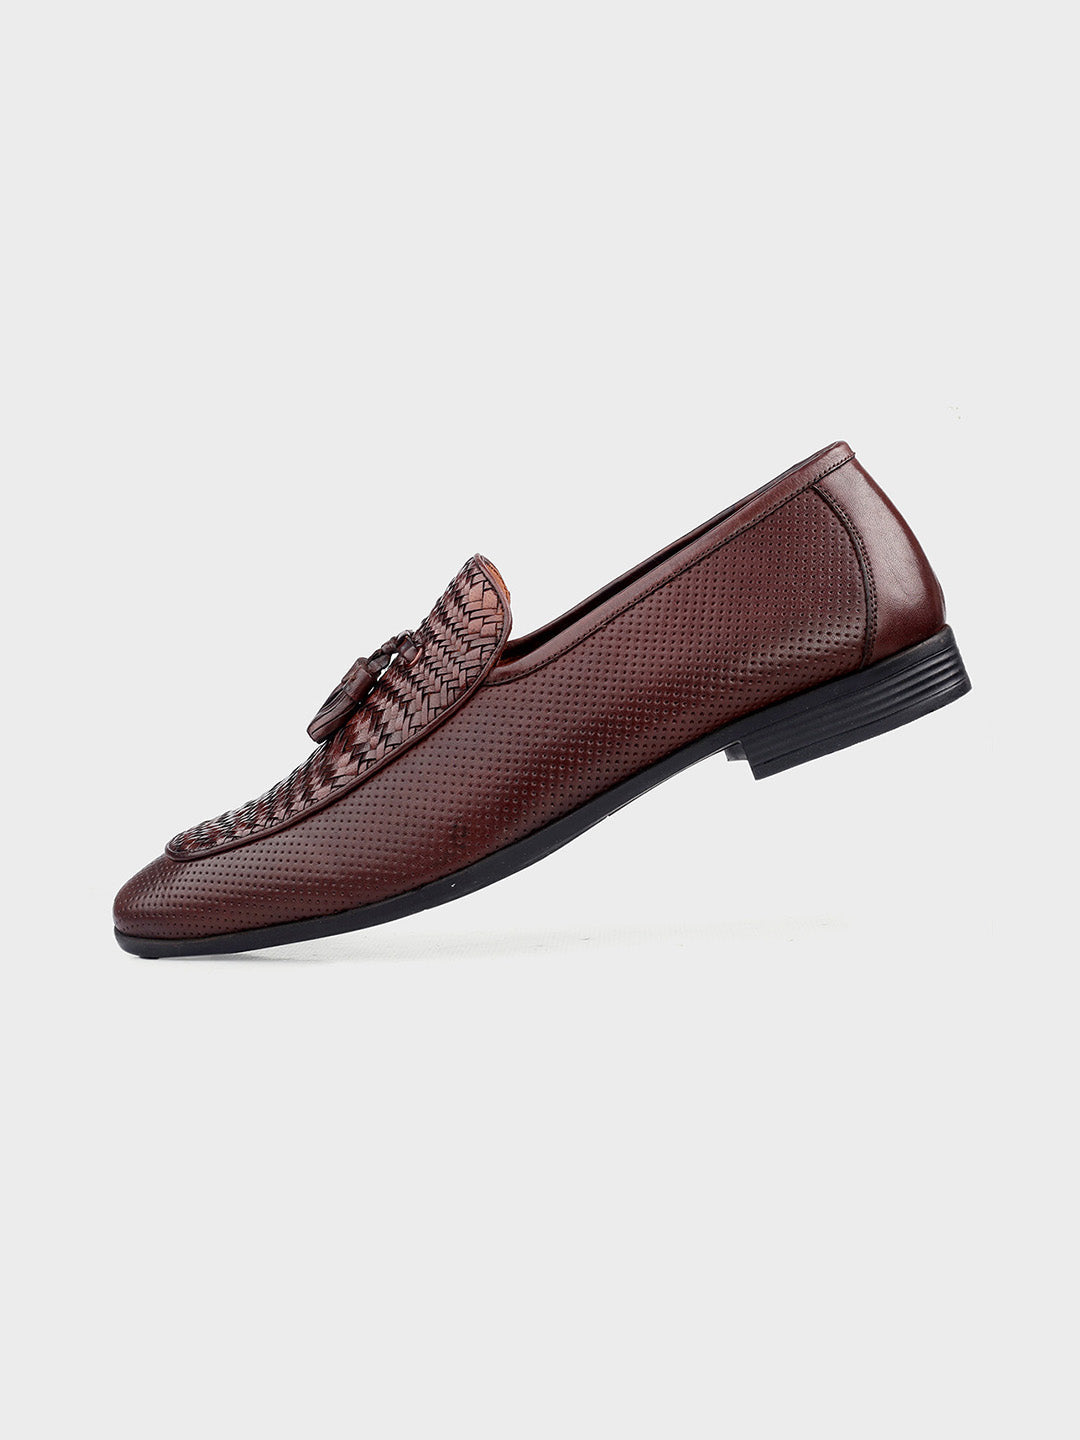 Men's Classic Brown Leather Slip-On Tassel Shoes